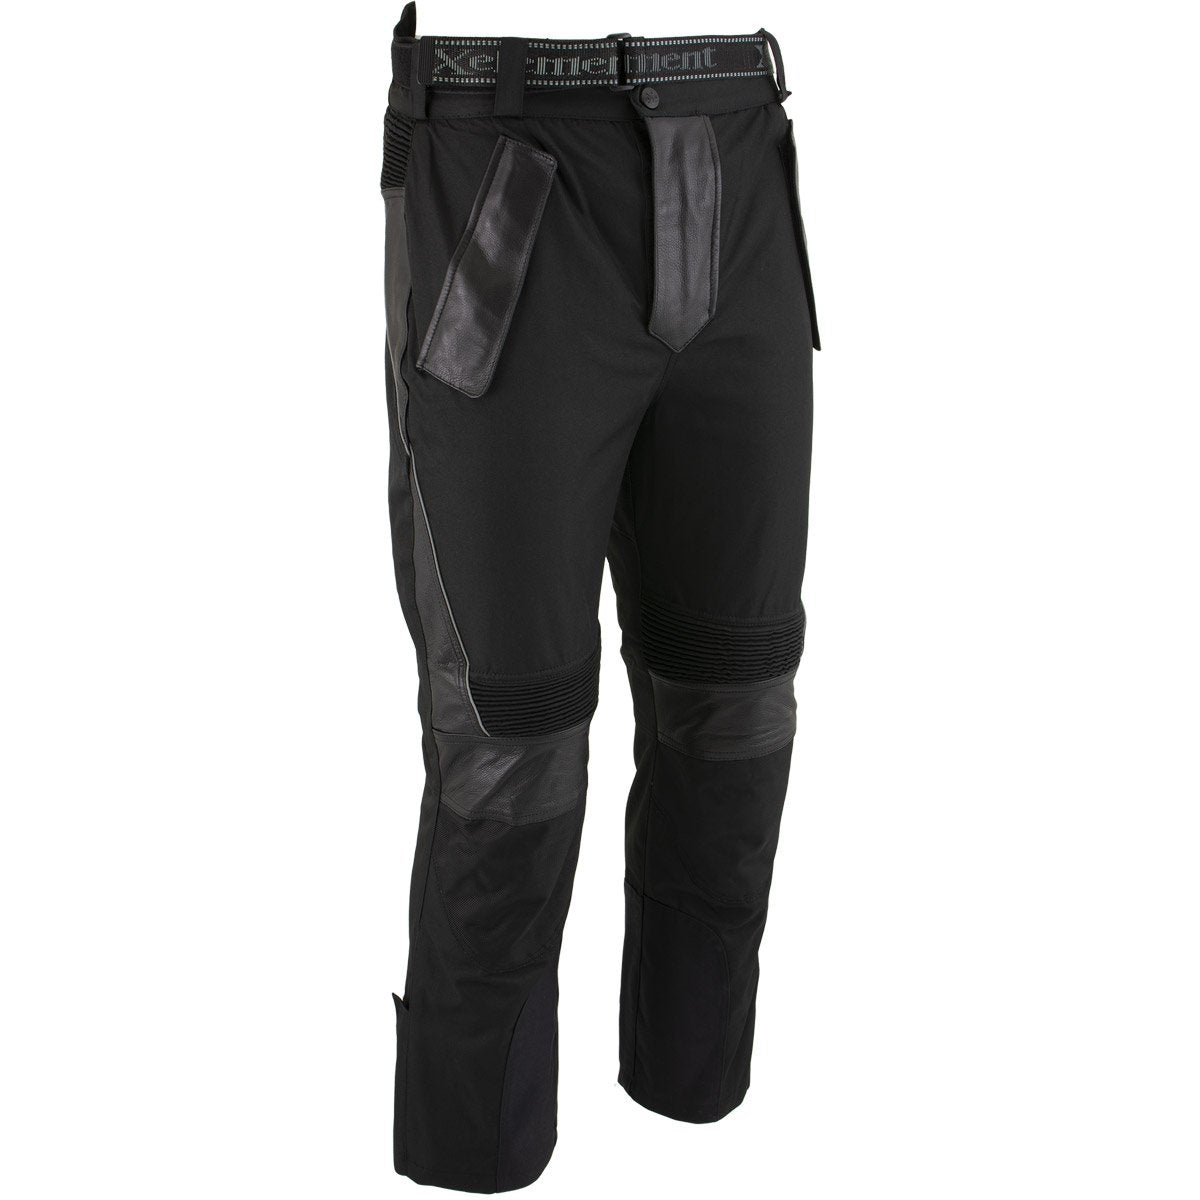 NEW MOTORCYCLE BLACK CE ARMOR PANTS